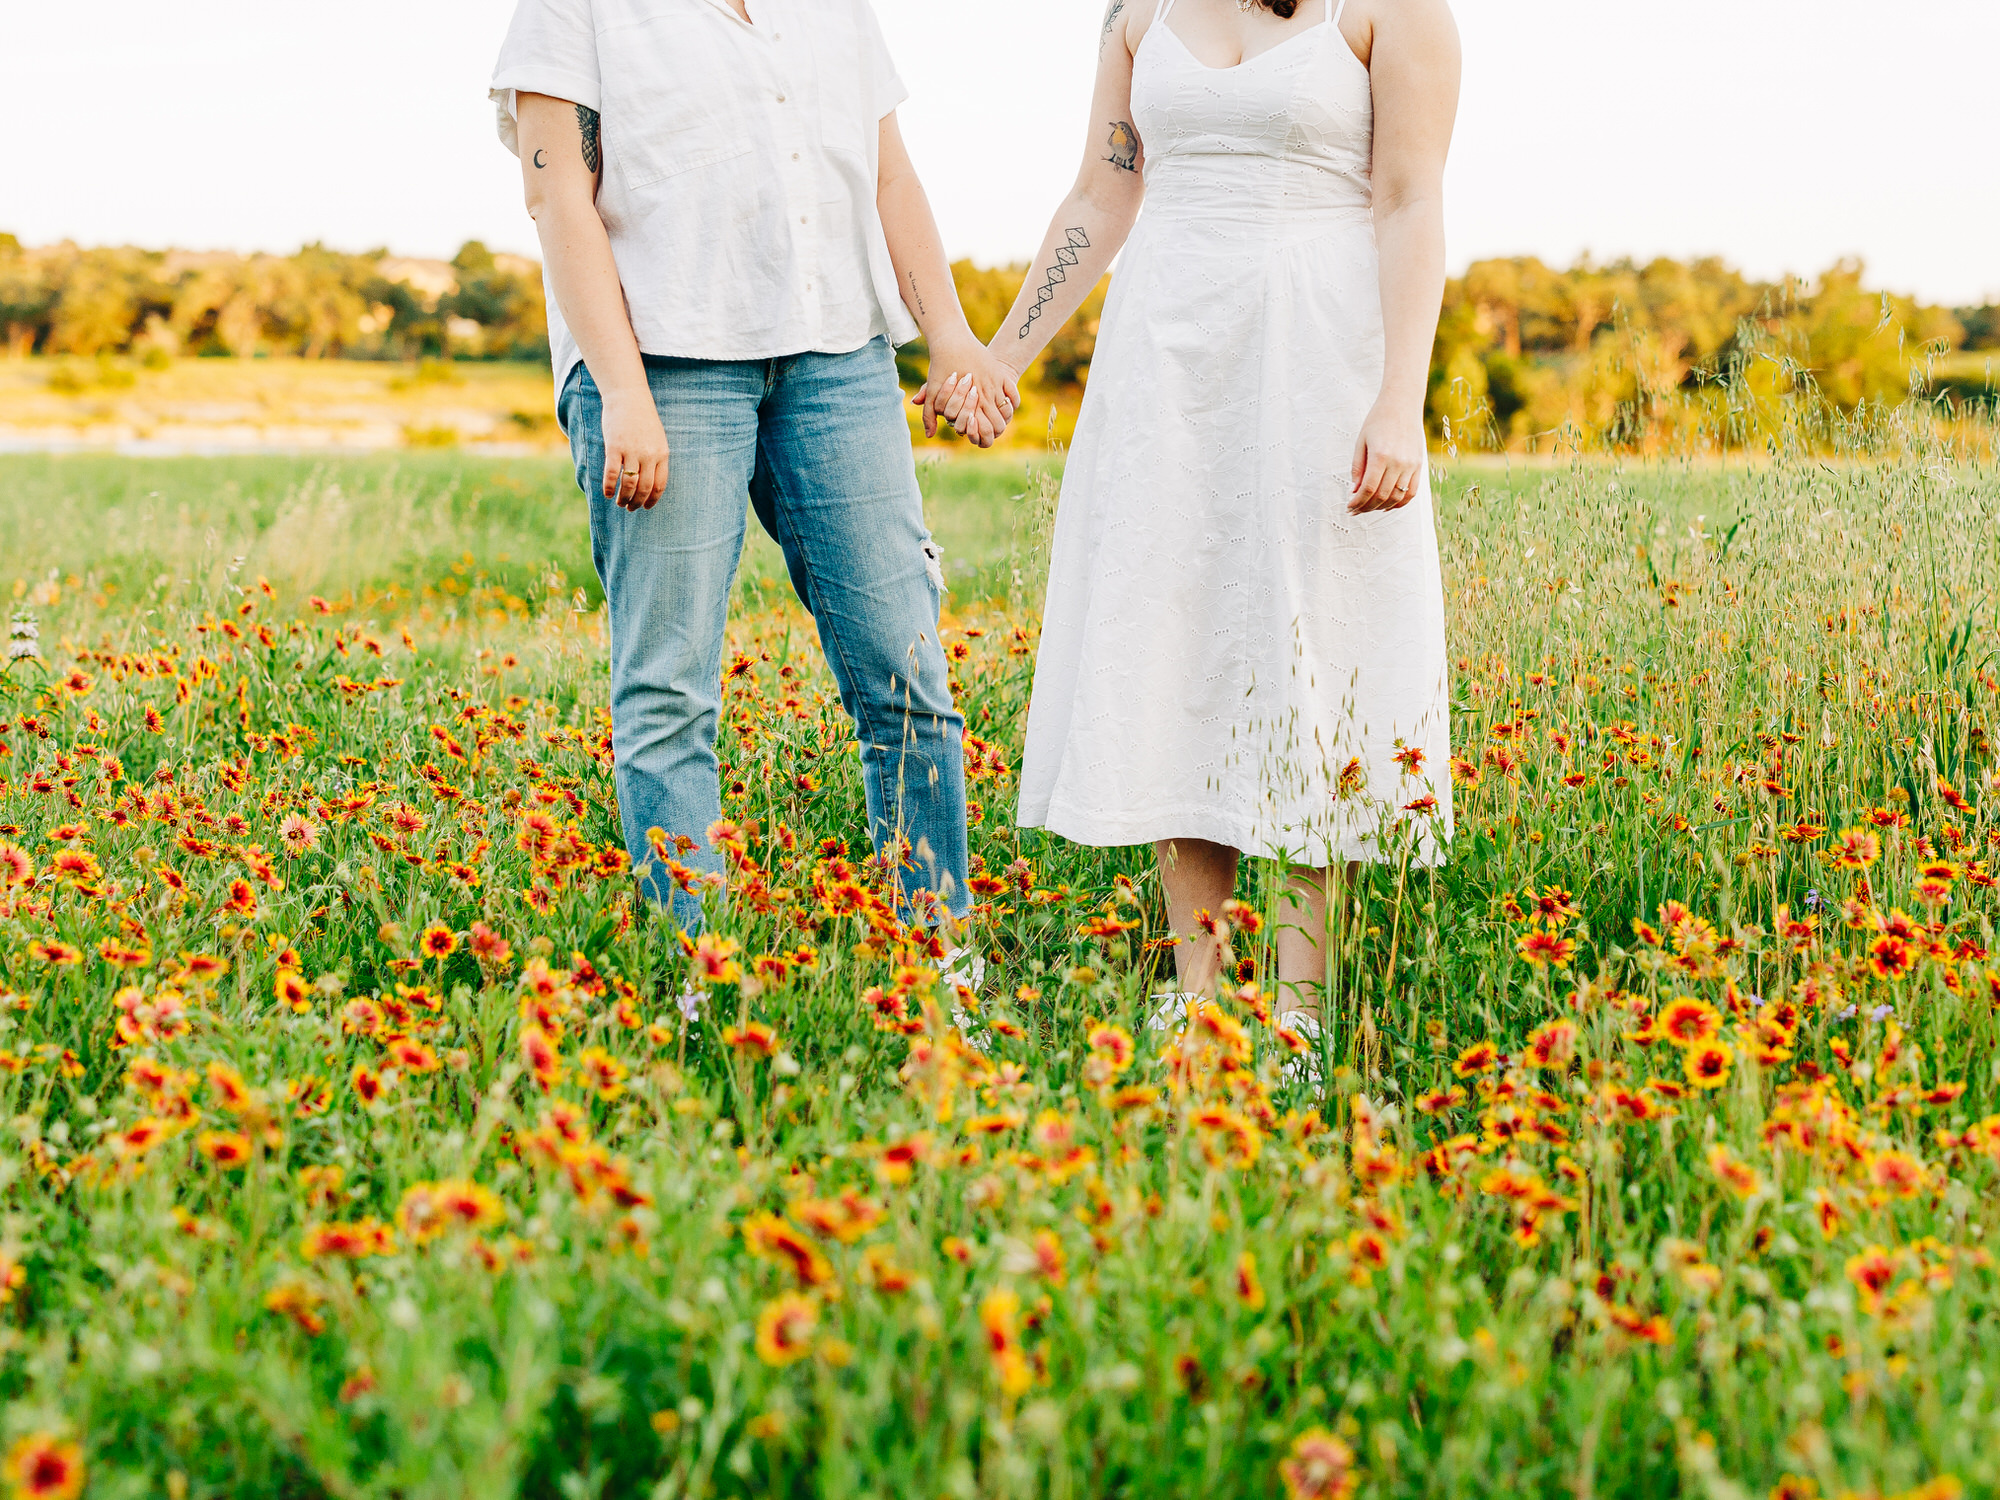 A photo of two engaged women standing in a field of wildflowers in Austin, TX. The flowers are yellow with a red center. One of the women is wearing a white spaghetti strap dress and the other is wearing a white button-up shirt and ripped blue jeans. The women are holding hands.